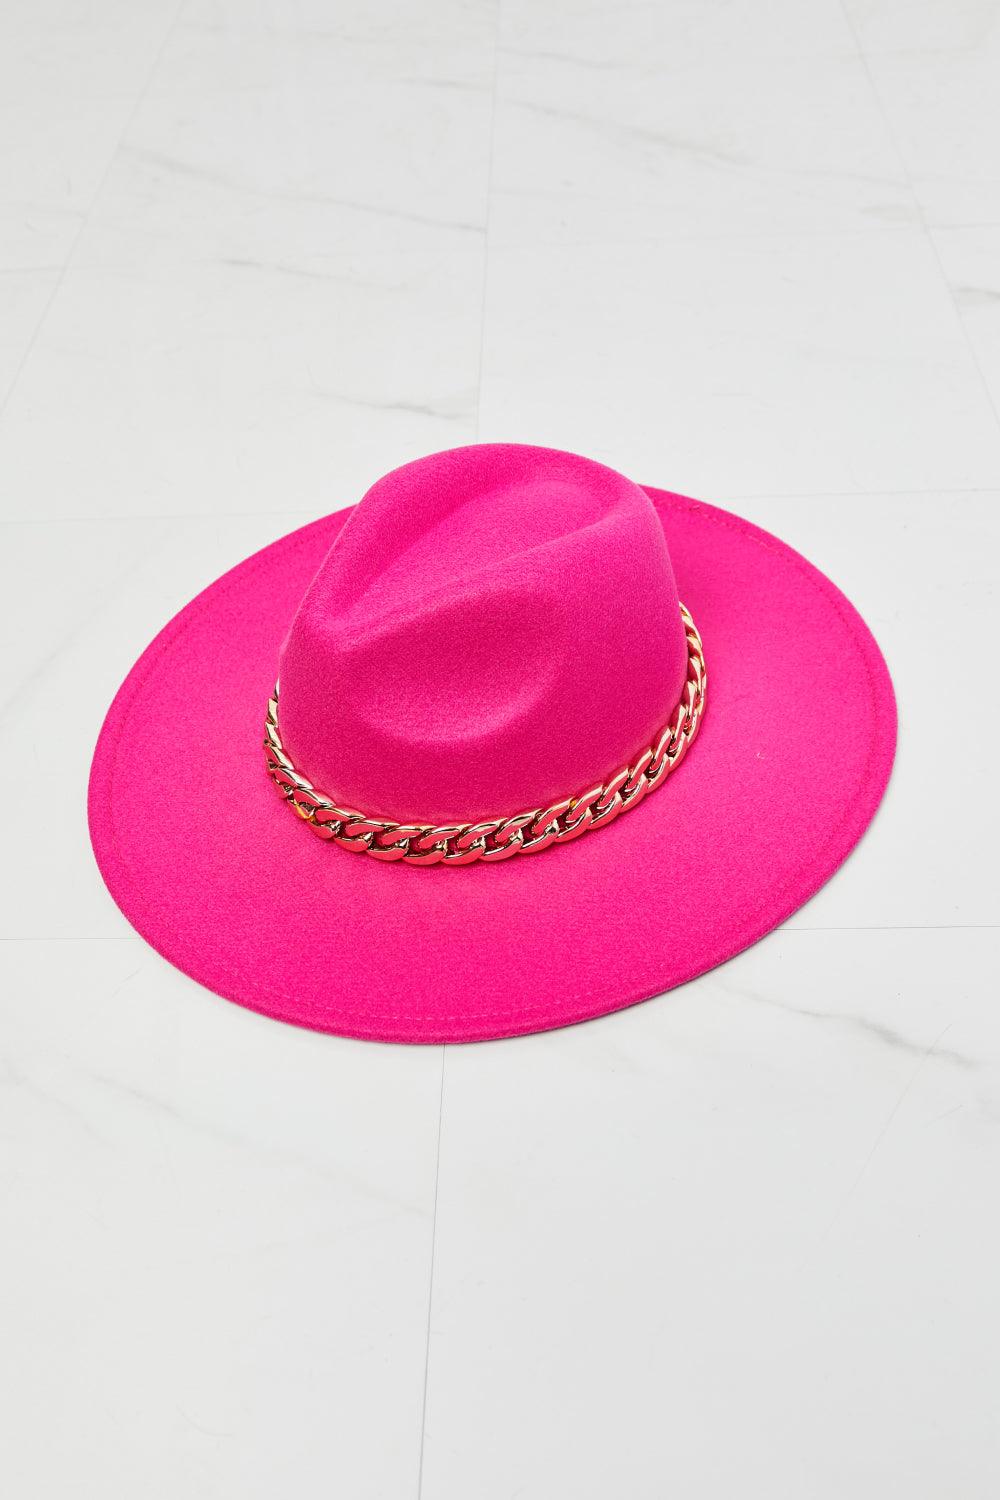 Fame Keep Your Promise Fedora Hat in Pink - Lab Fashion, Home & Health